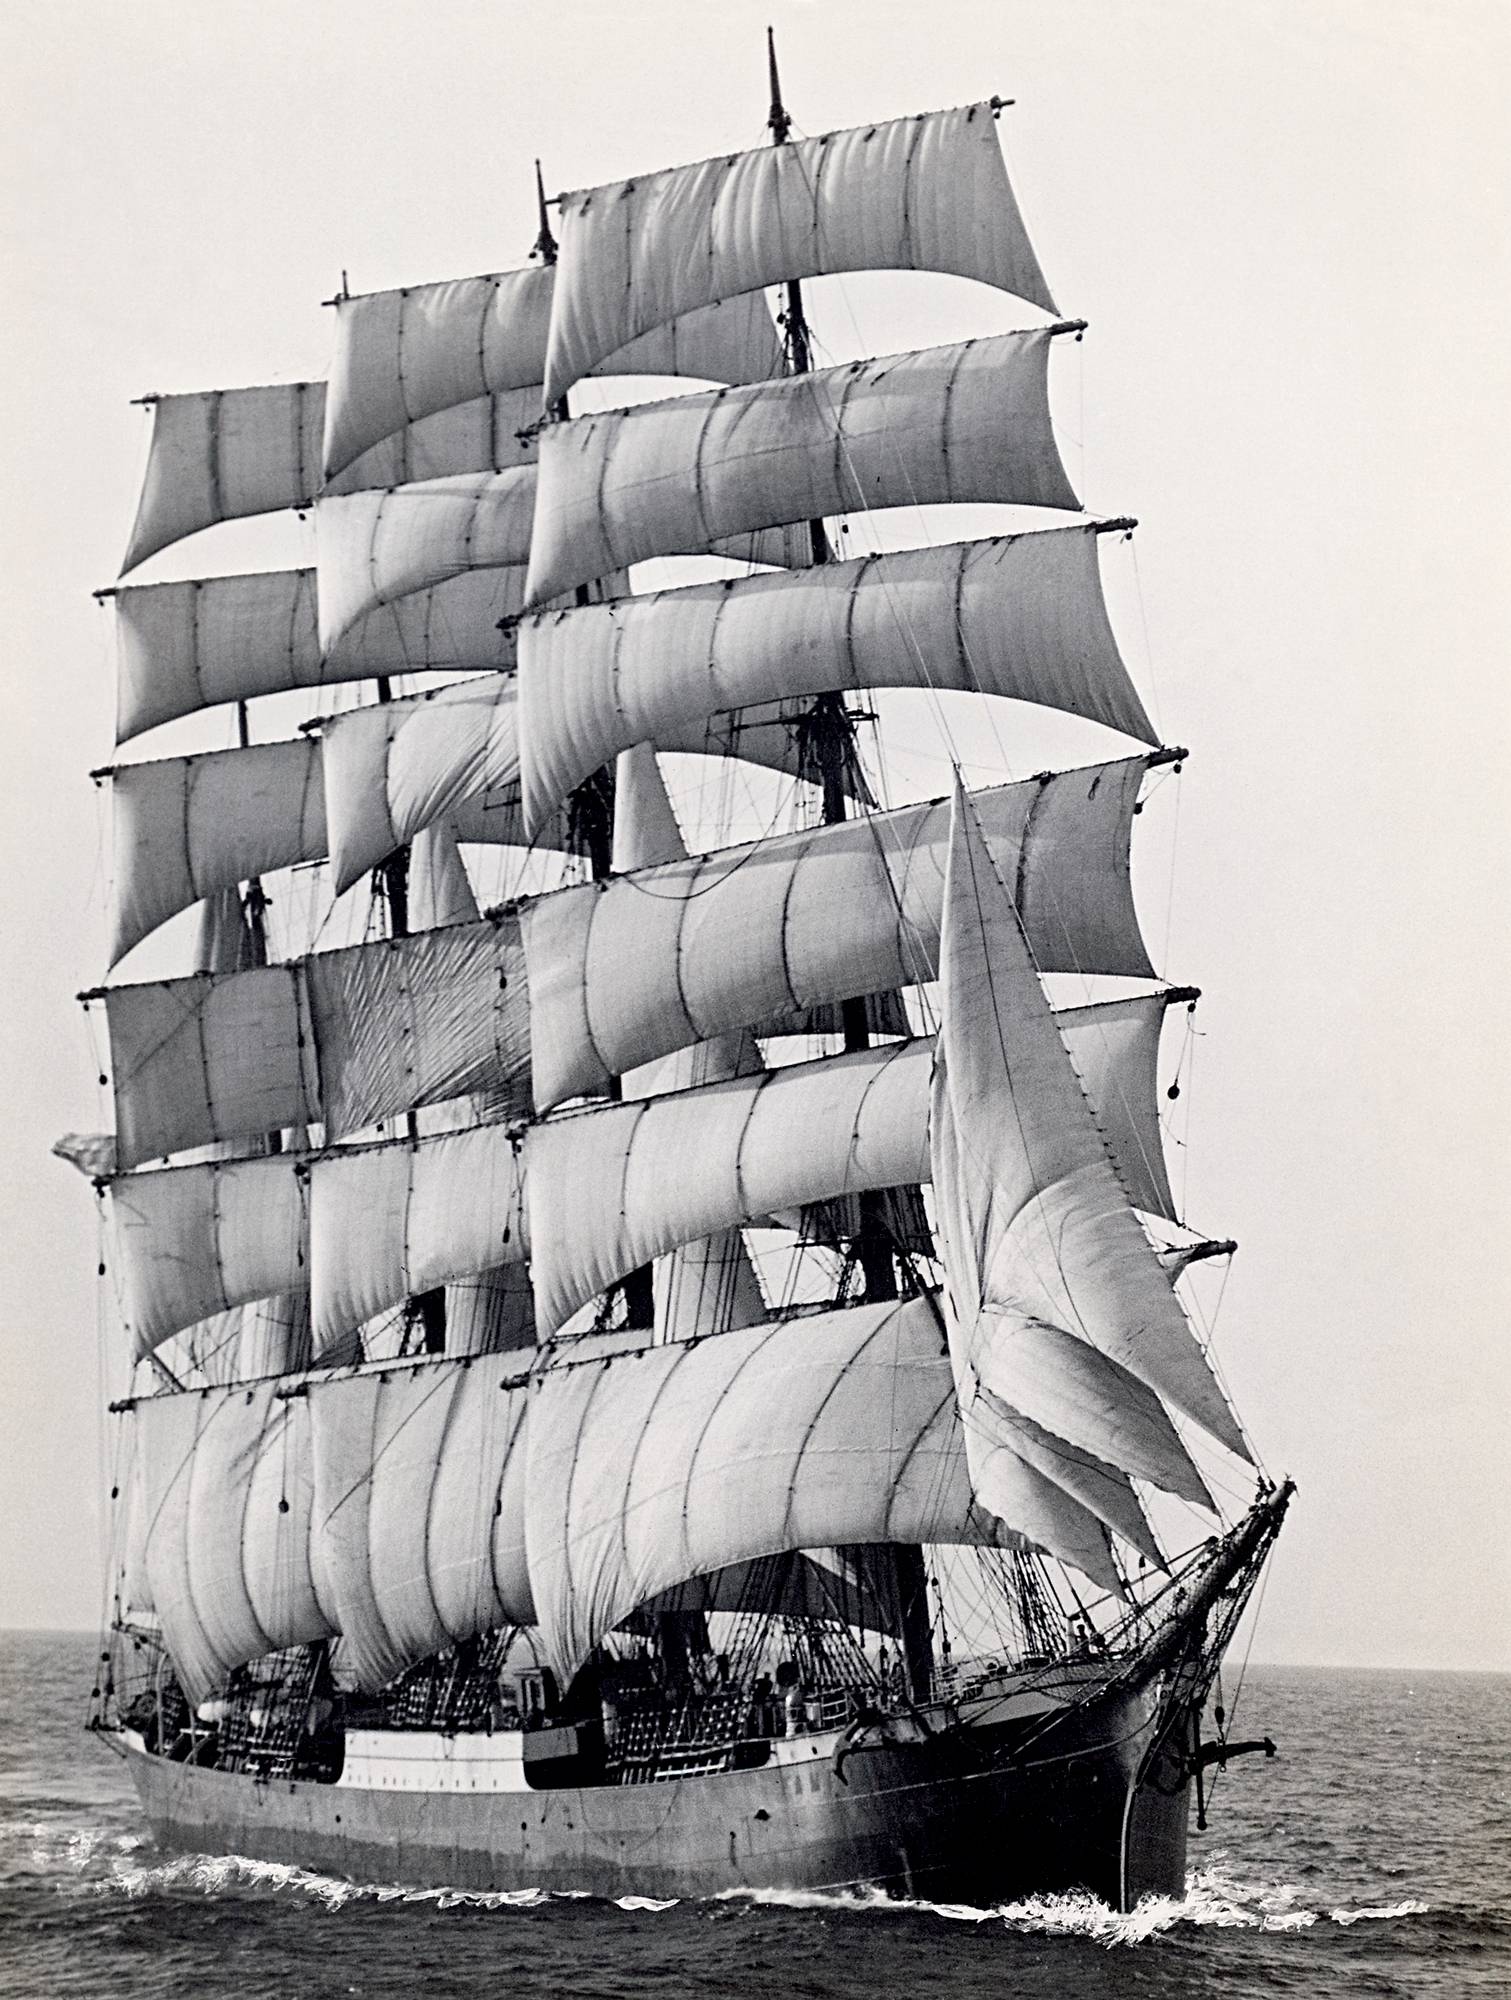 The last commercial sailing ship, Pamir, to round Cape Horn in 1949